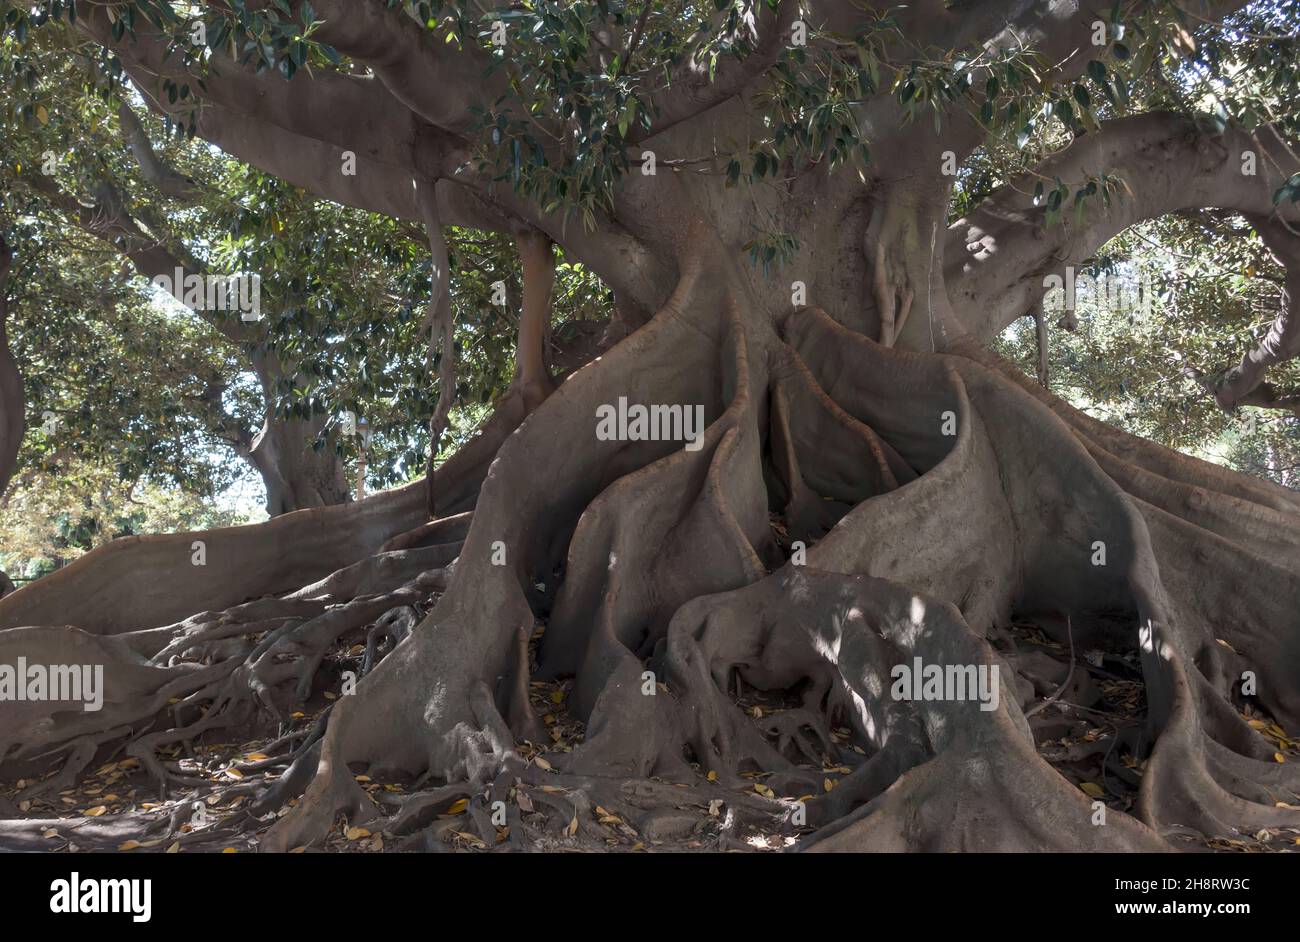 Ombu tree trunk and roots Recoleta, Buenos Aires, Argentina Stock Photo